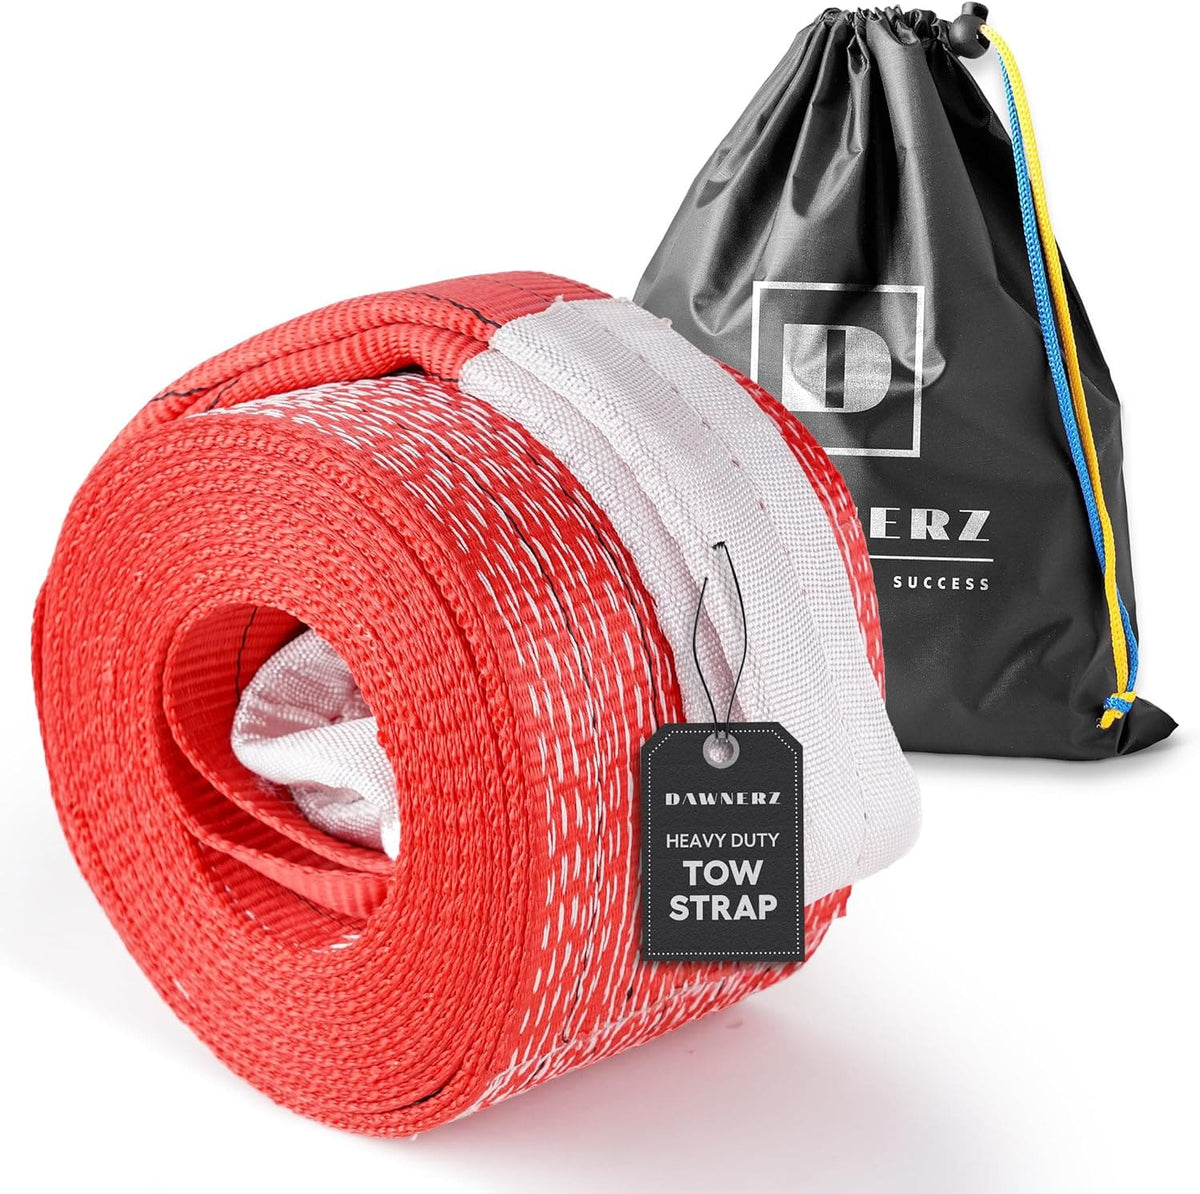 90,000 lb Tow Strap - 20 ft | Tow Strap for Trucks & Buses